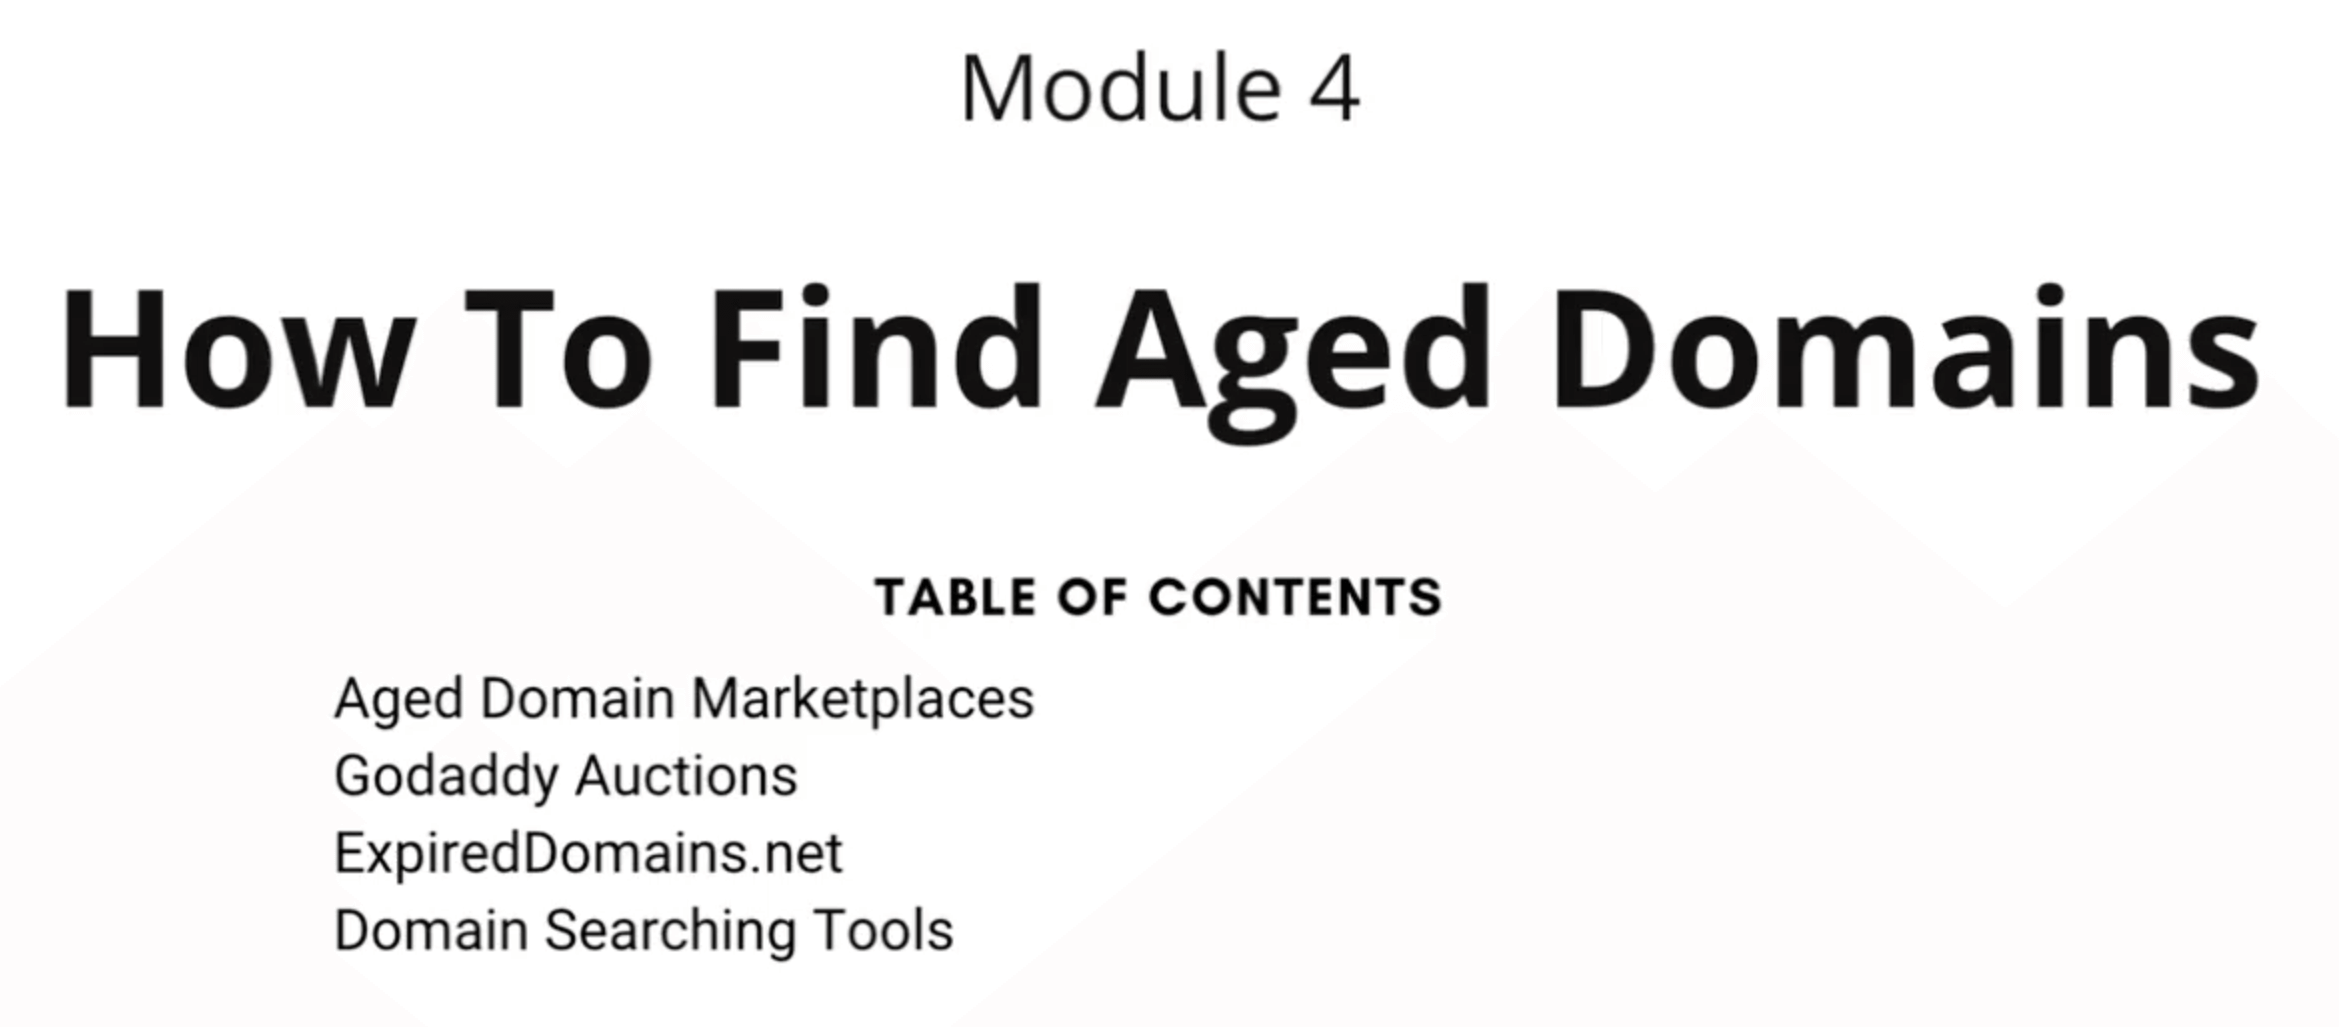 Aged Domain Course - How to Find